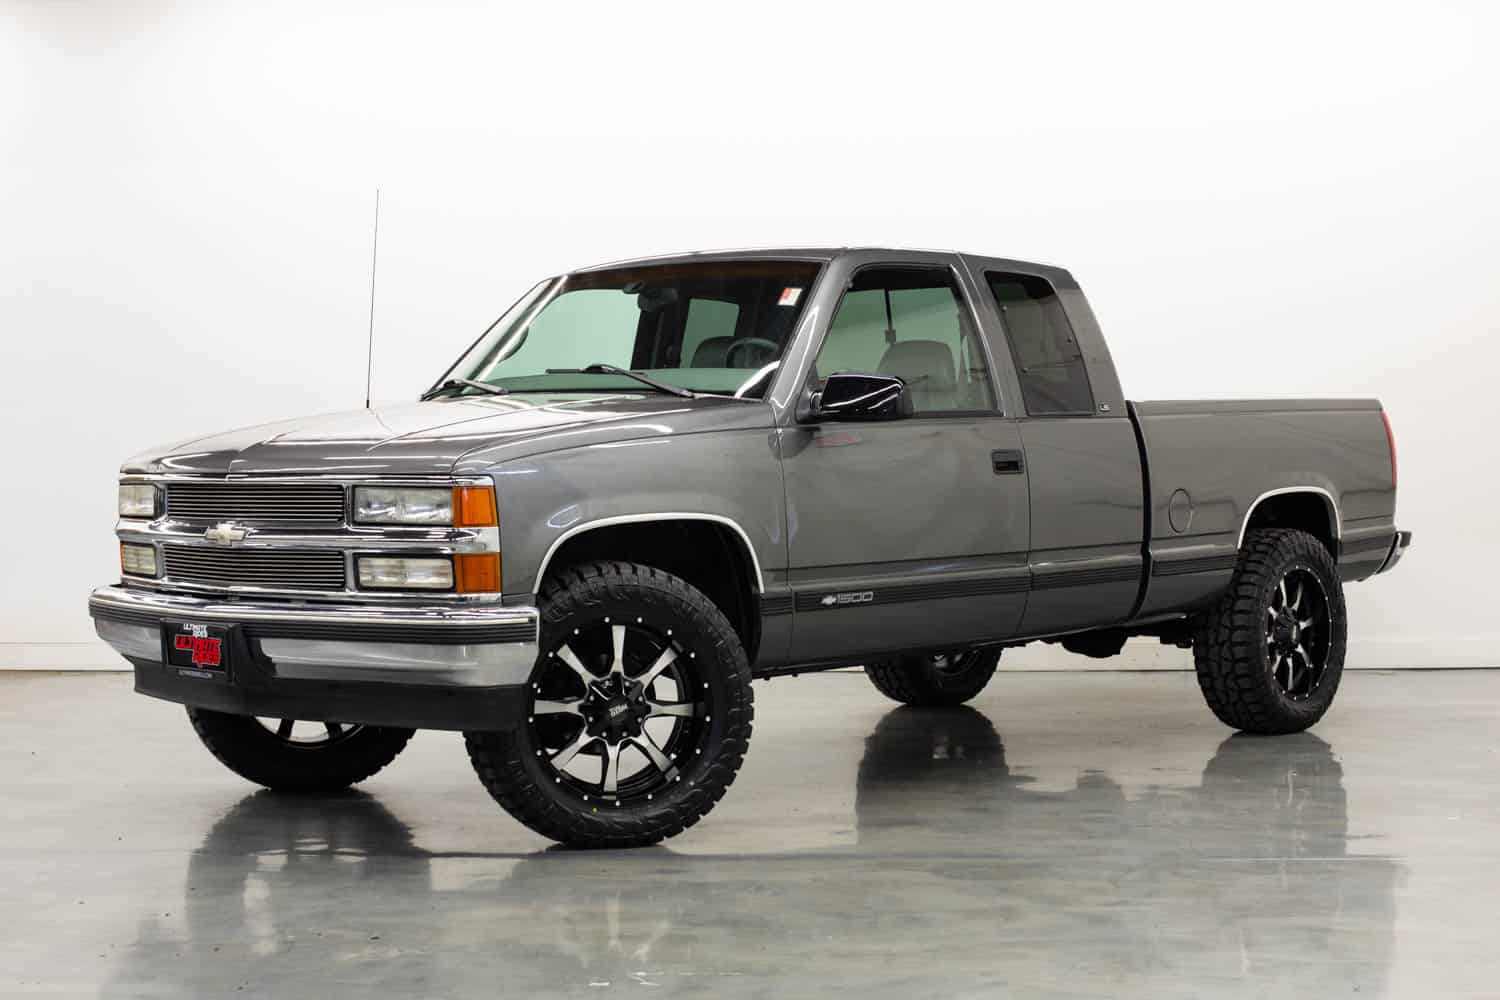 Used Lifted Trucks for Sale